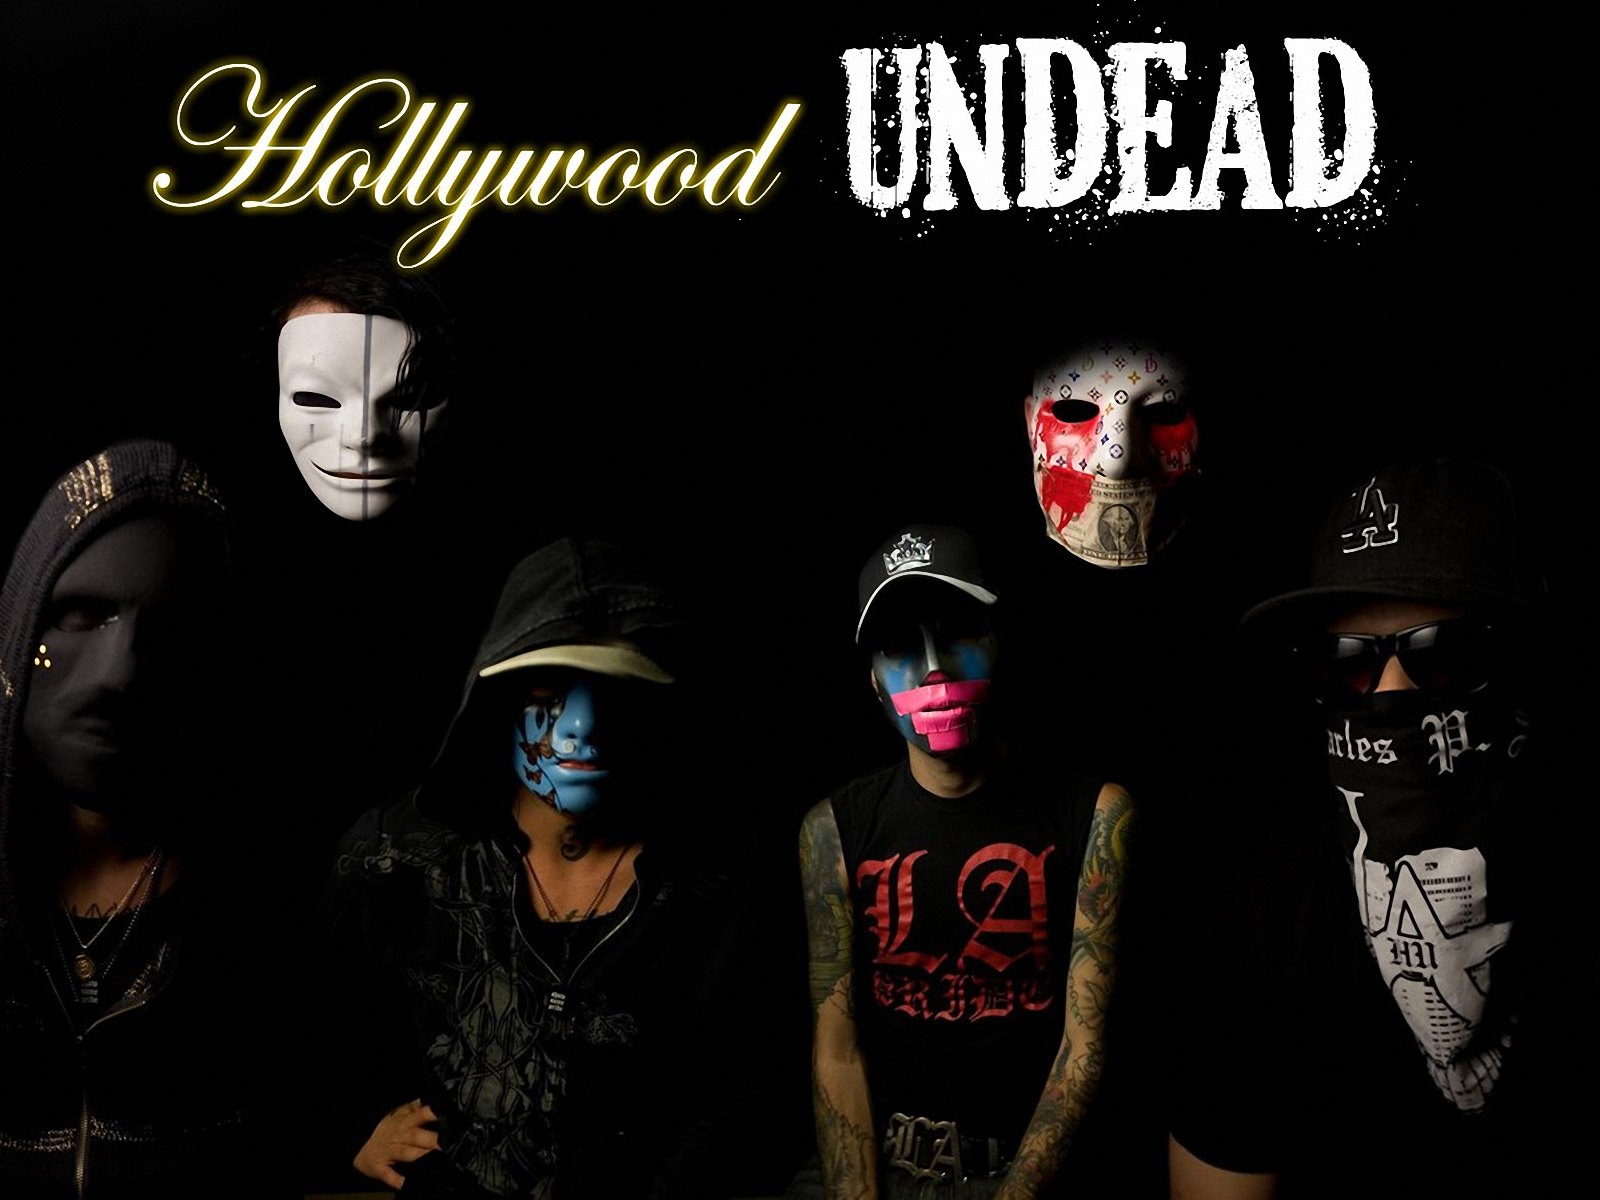 Hollywood Undead WallpapersHollywood Undead Wallpapers Pictures